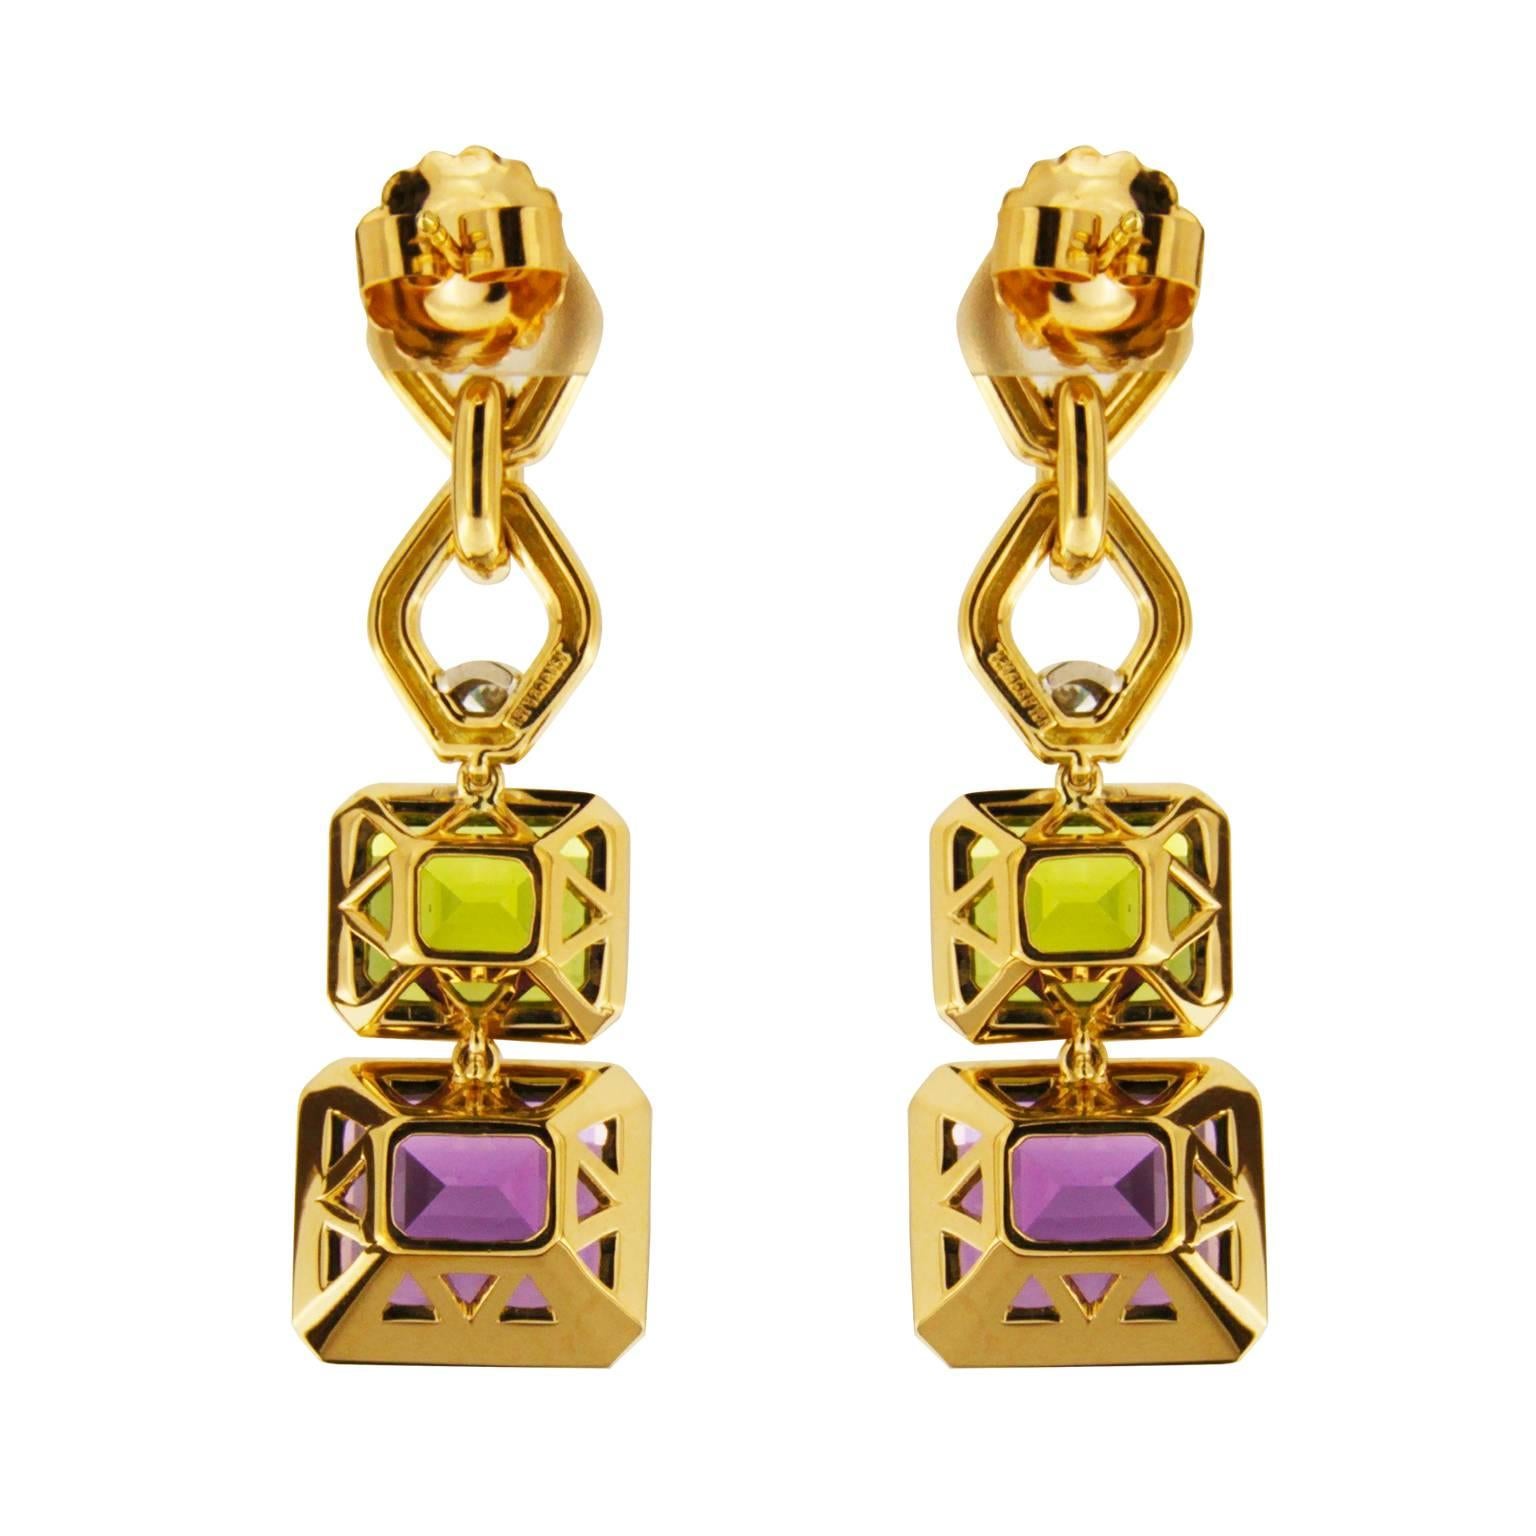 These 18k yellow gold and platinum drop earrings boast a range of gemstones. Amethyst topped with peridot hang from the bottom. Above are rhombus shaped links highlighted with round brilliant cut diamonds. There are two emerald-cut amethysts in all.